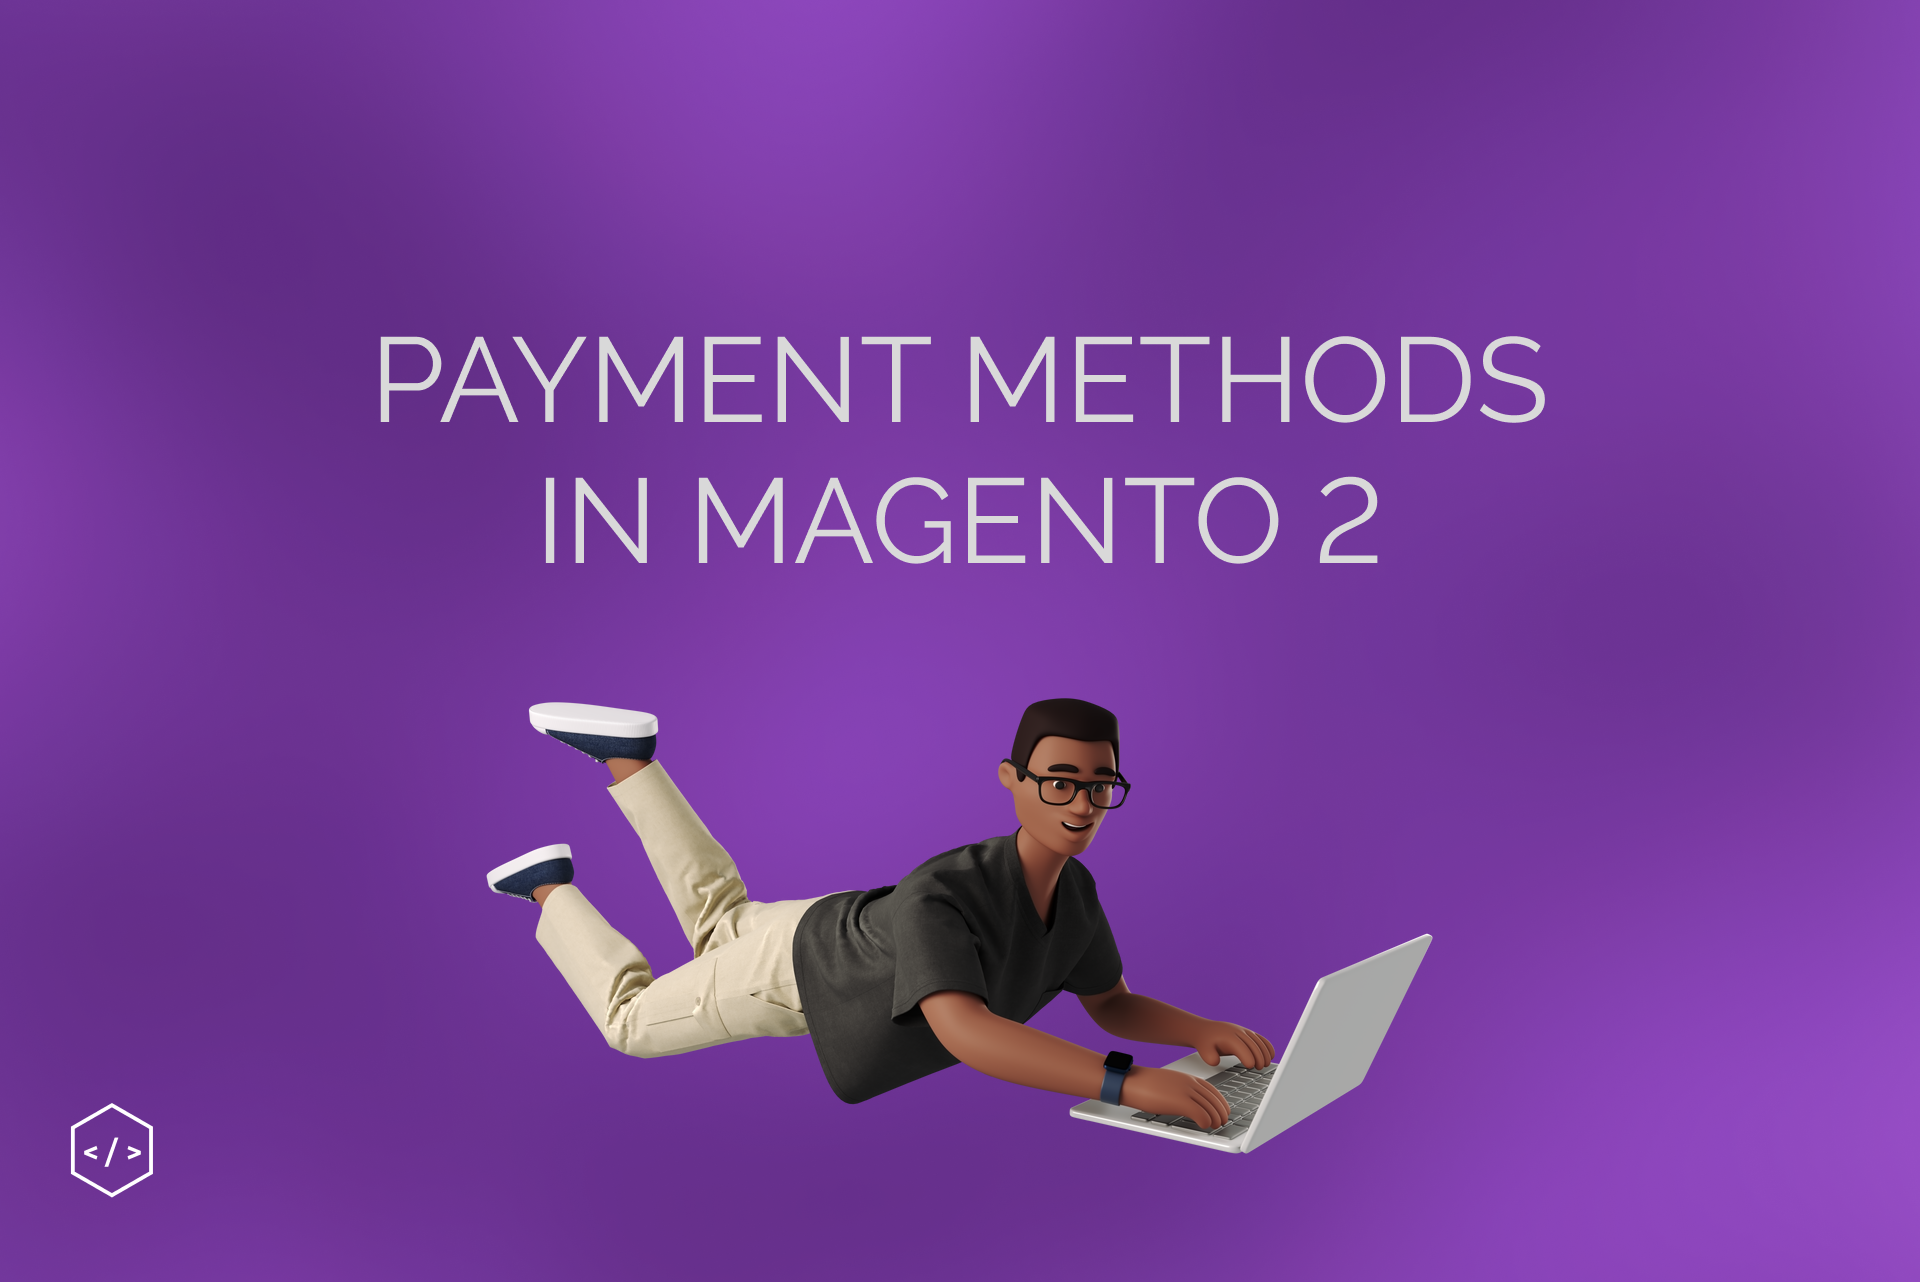 How to add a payment method in Magento 2?